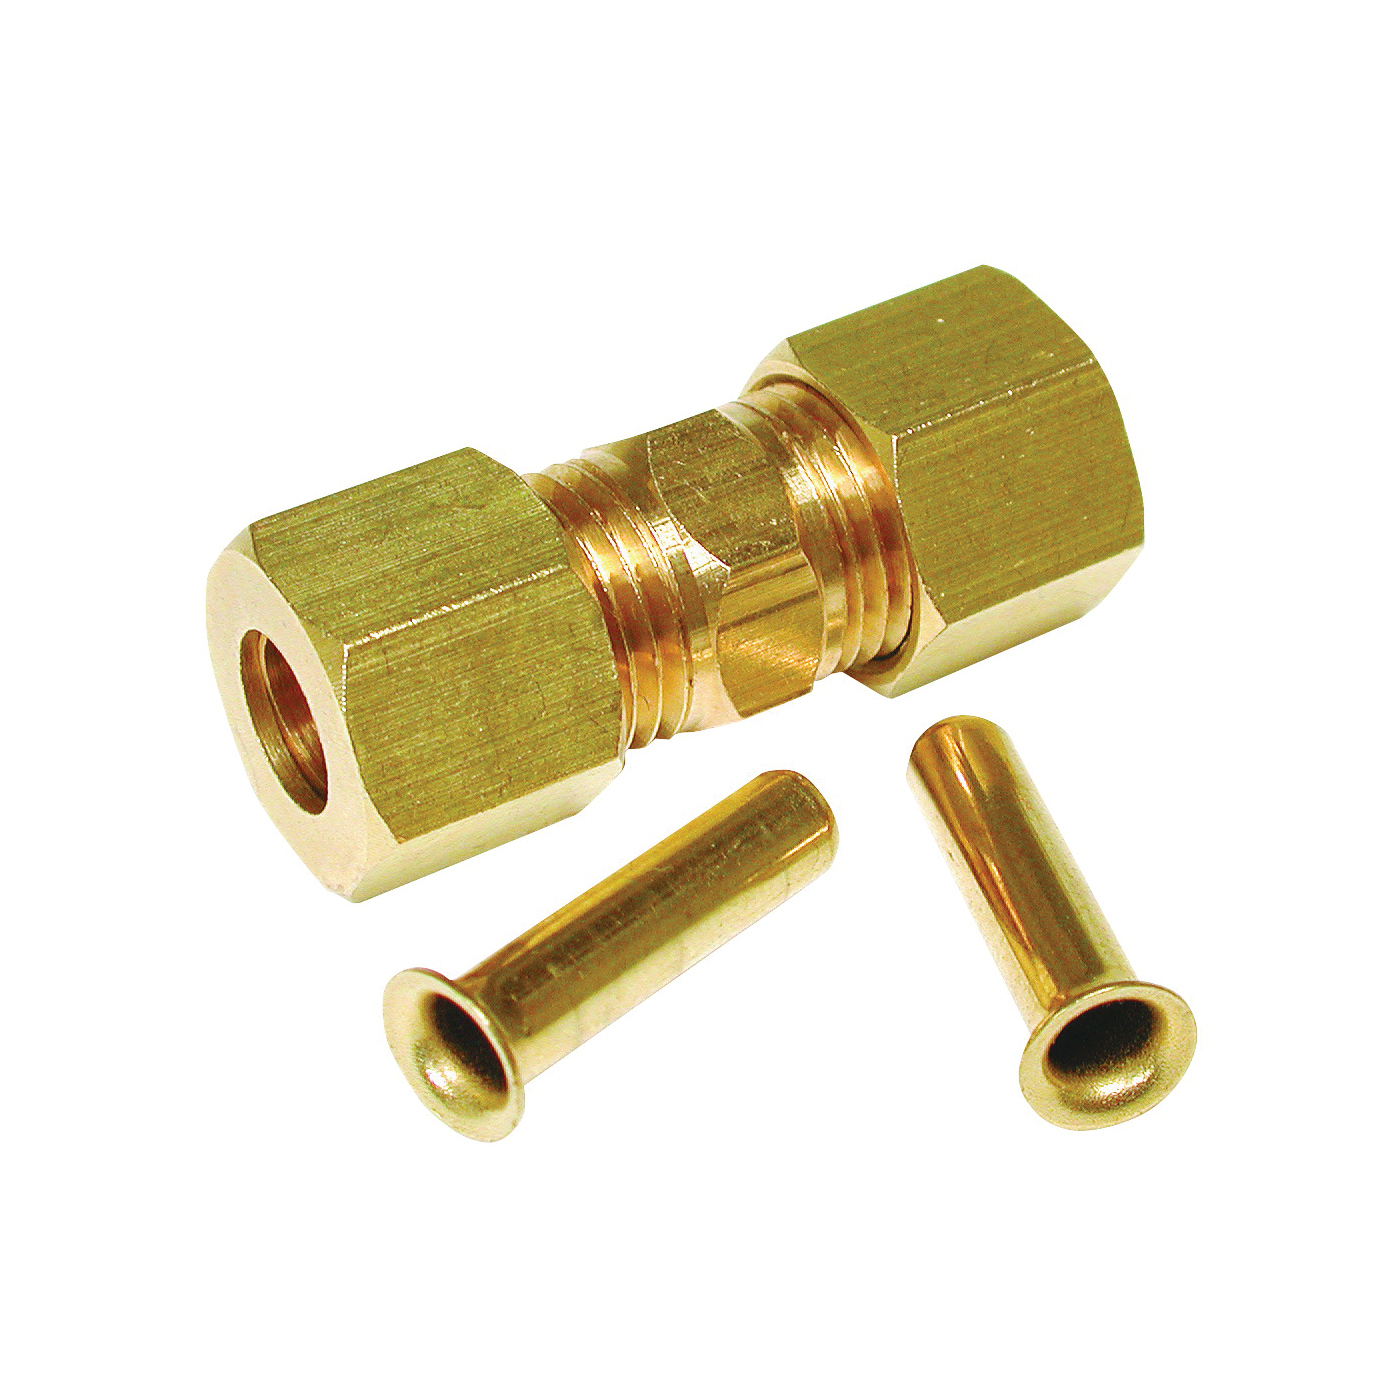 9329 Compression Union, Brass, For: Evaporative Cooler Purge Systems